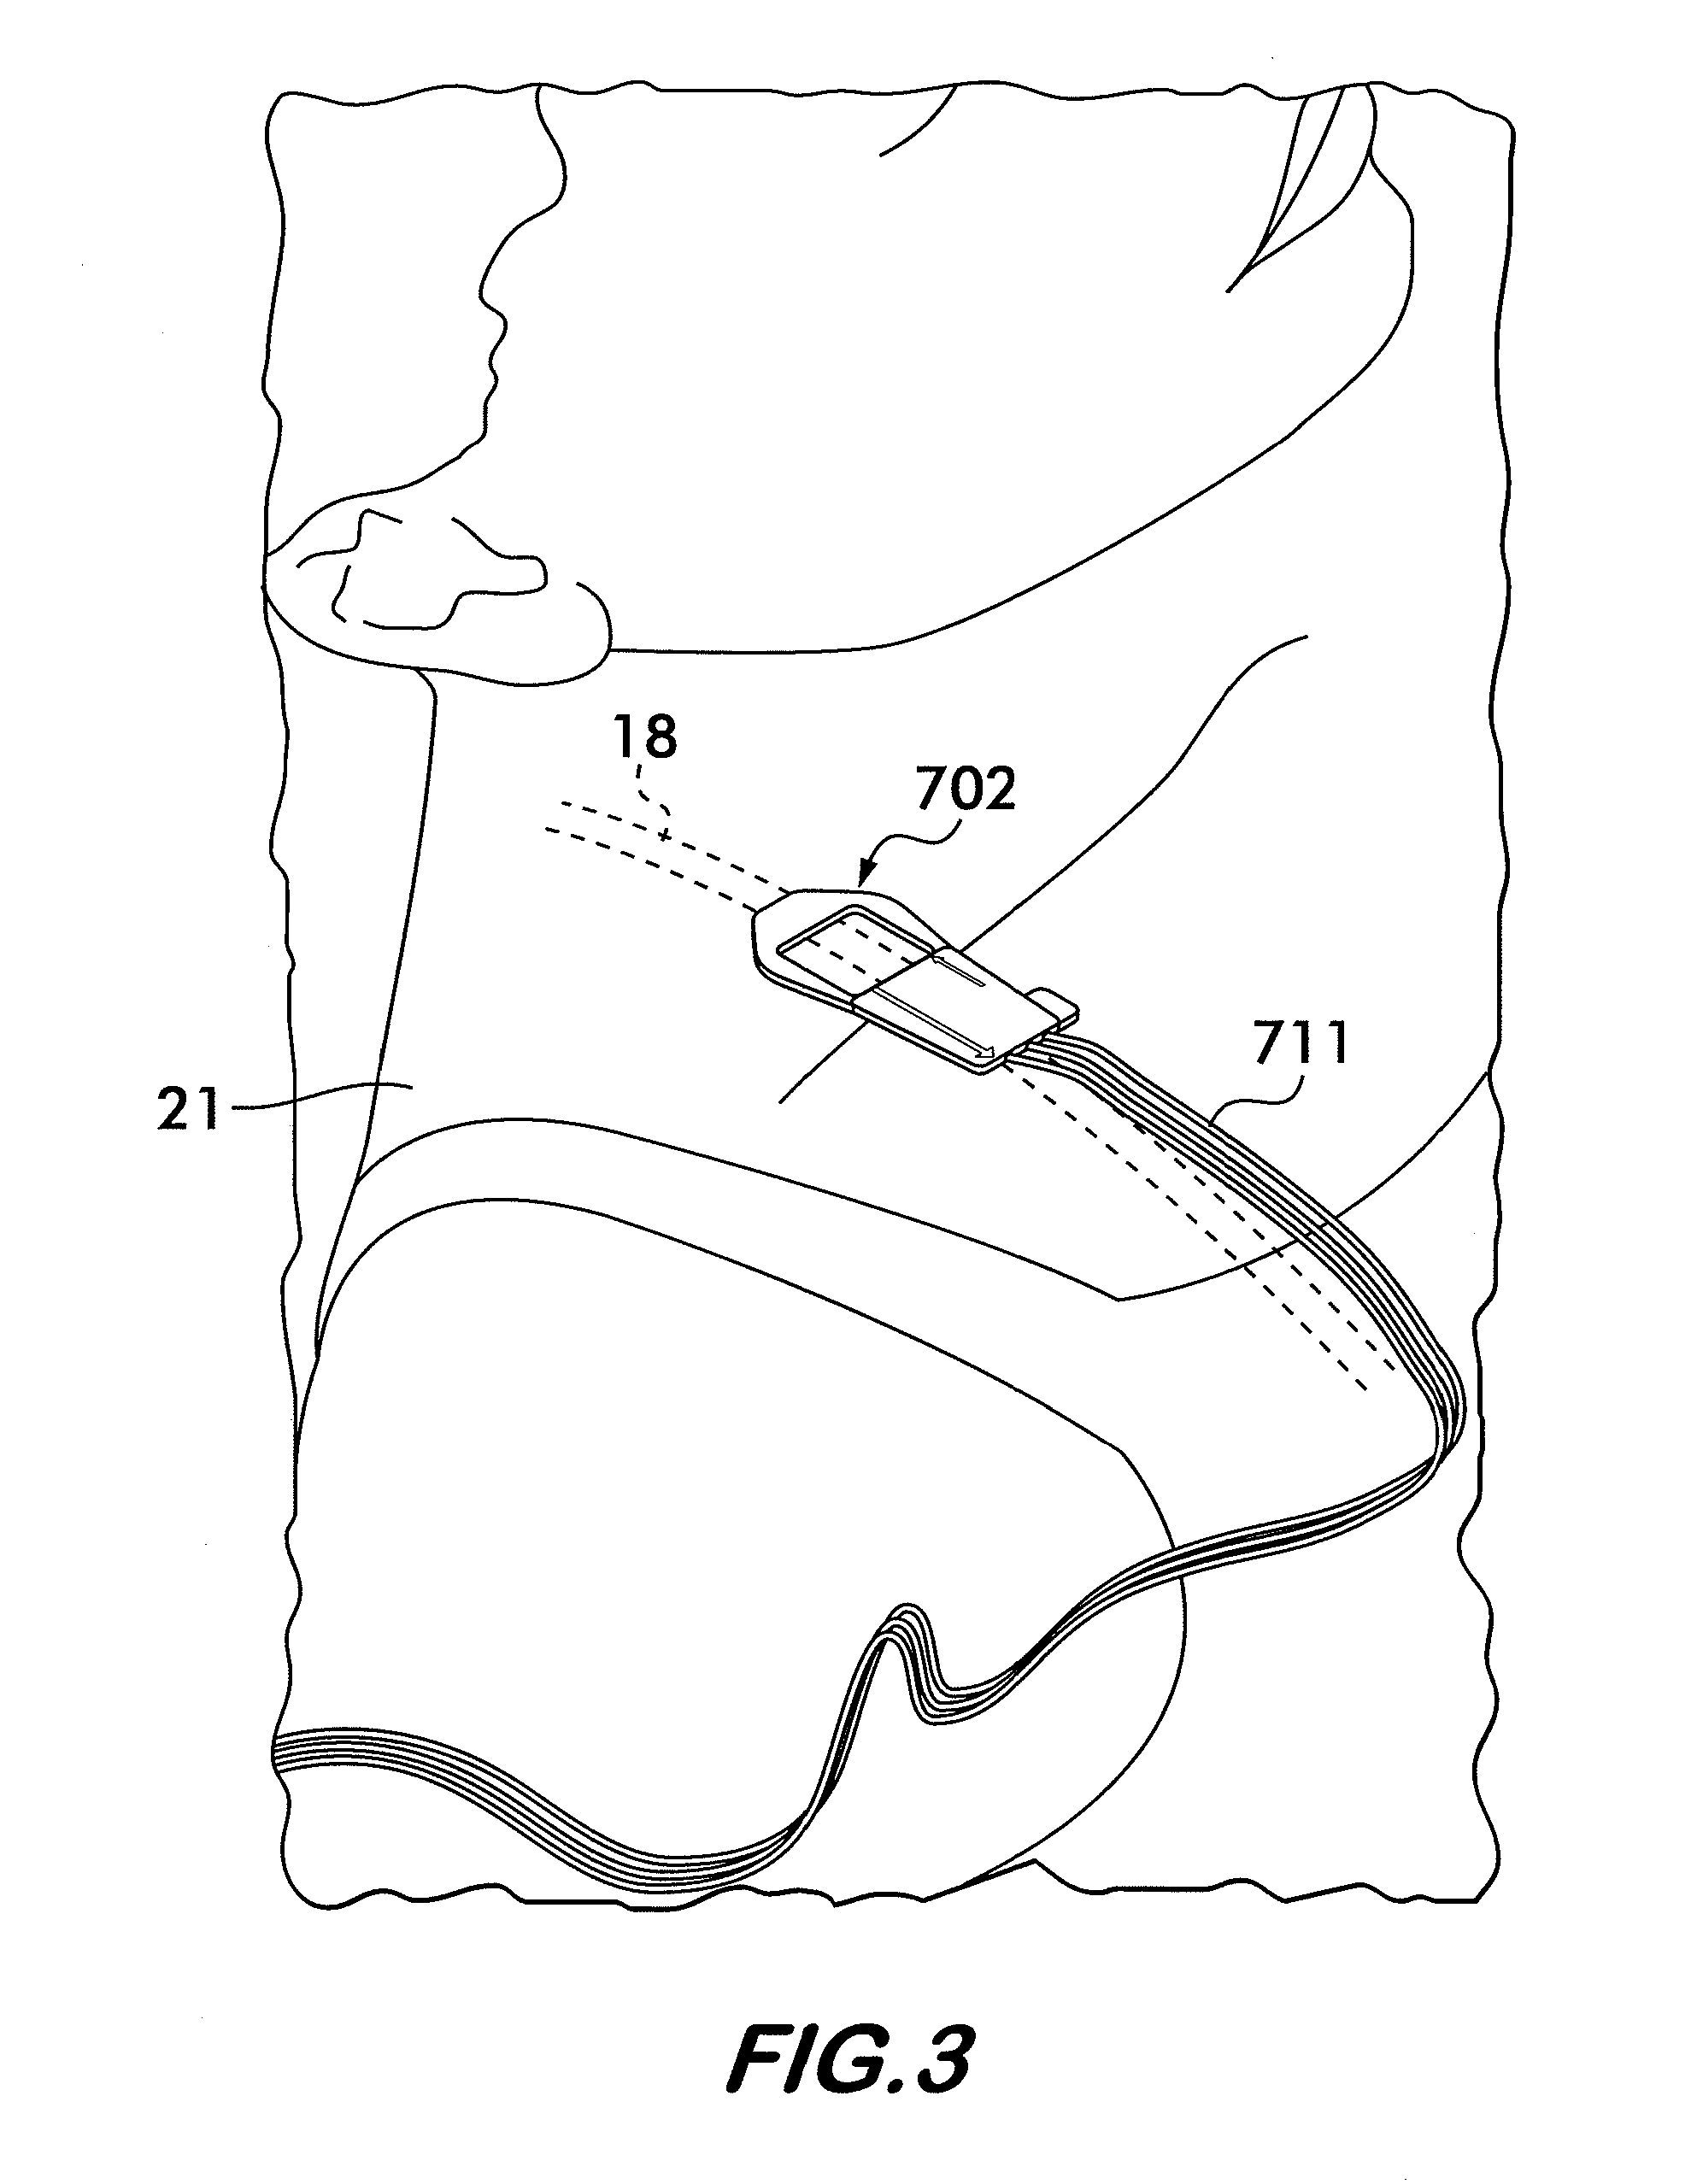 Cerebrospinal fluid evaluation system having thermal flow and flow rate measurement pad using a plurality of control sensors